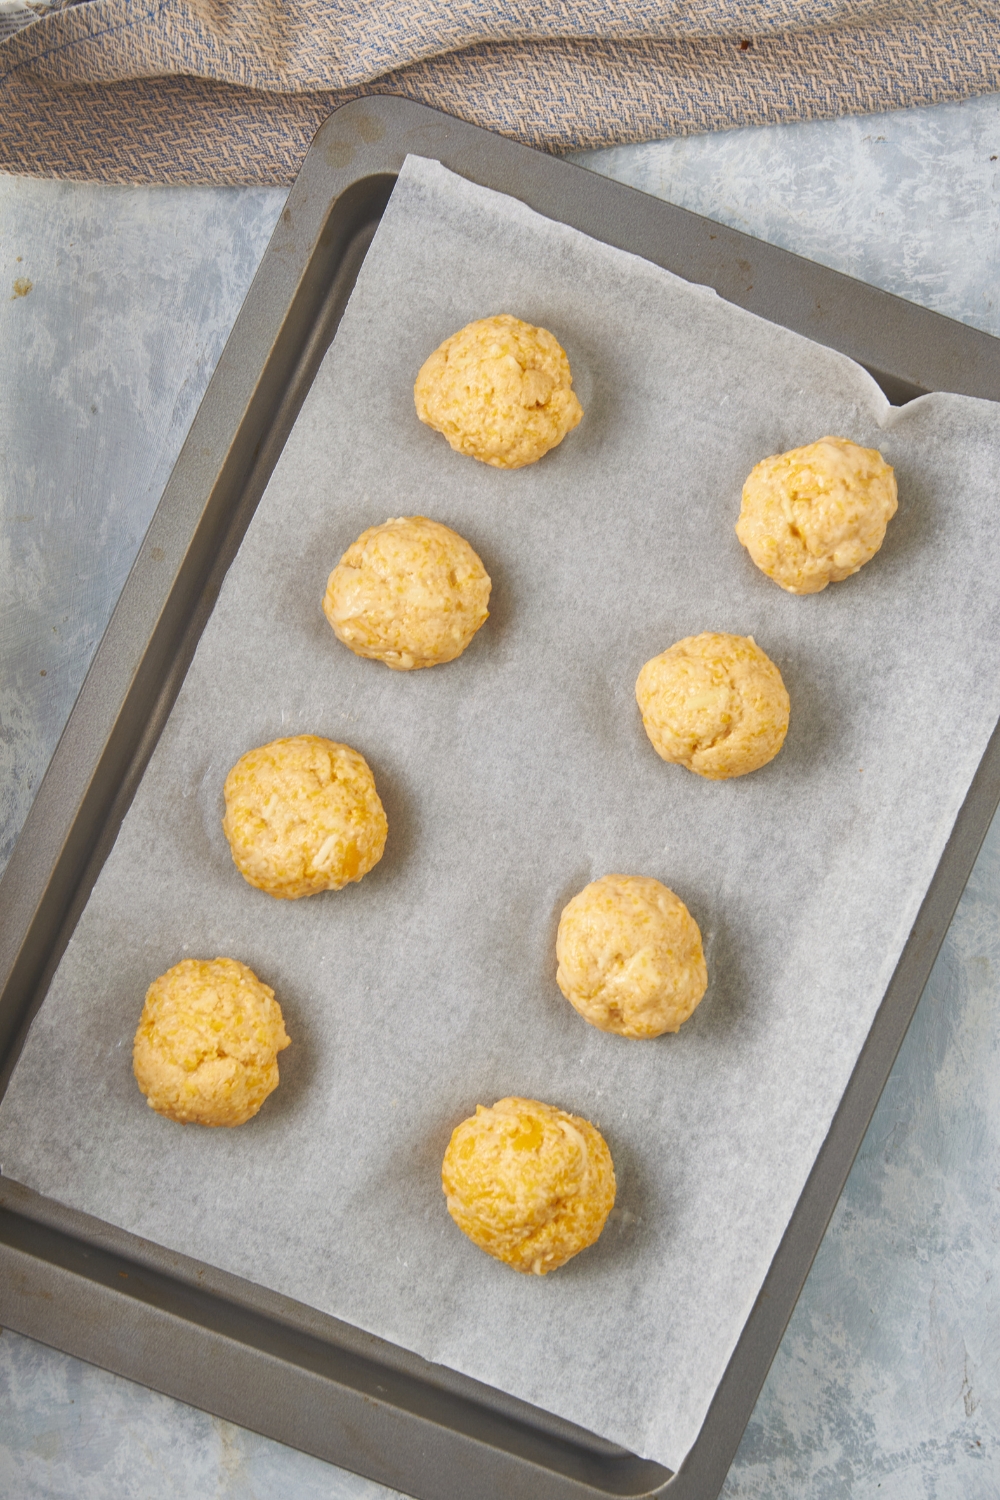 Eight equal-sized balls of dough on a baking sheet lined with parchment paper.